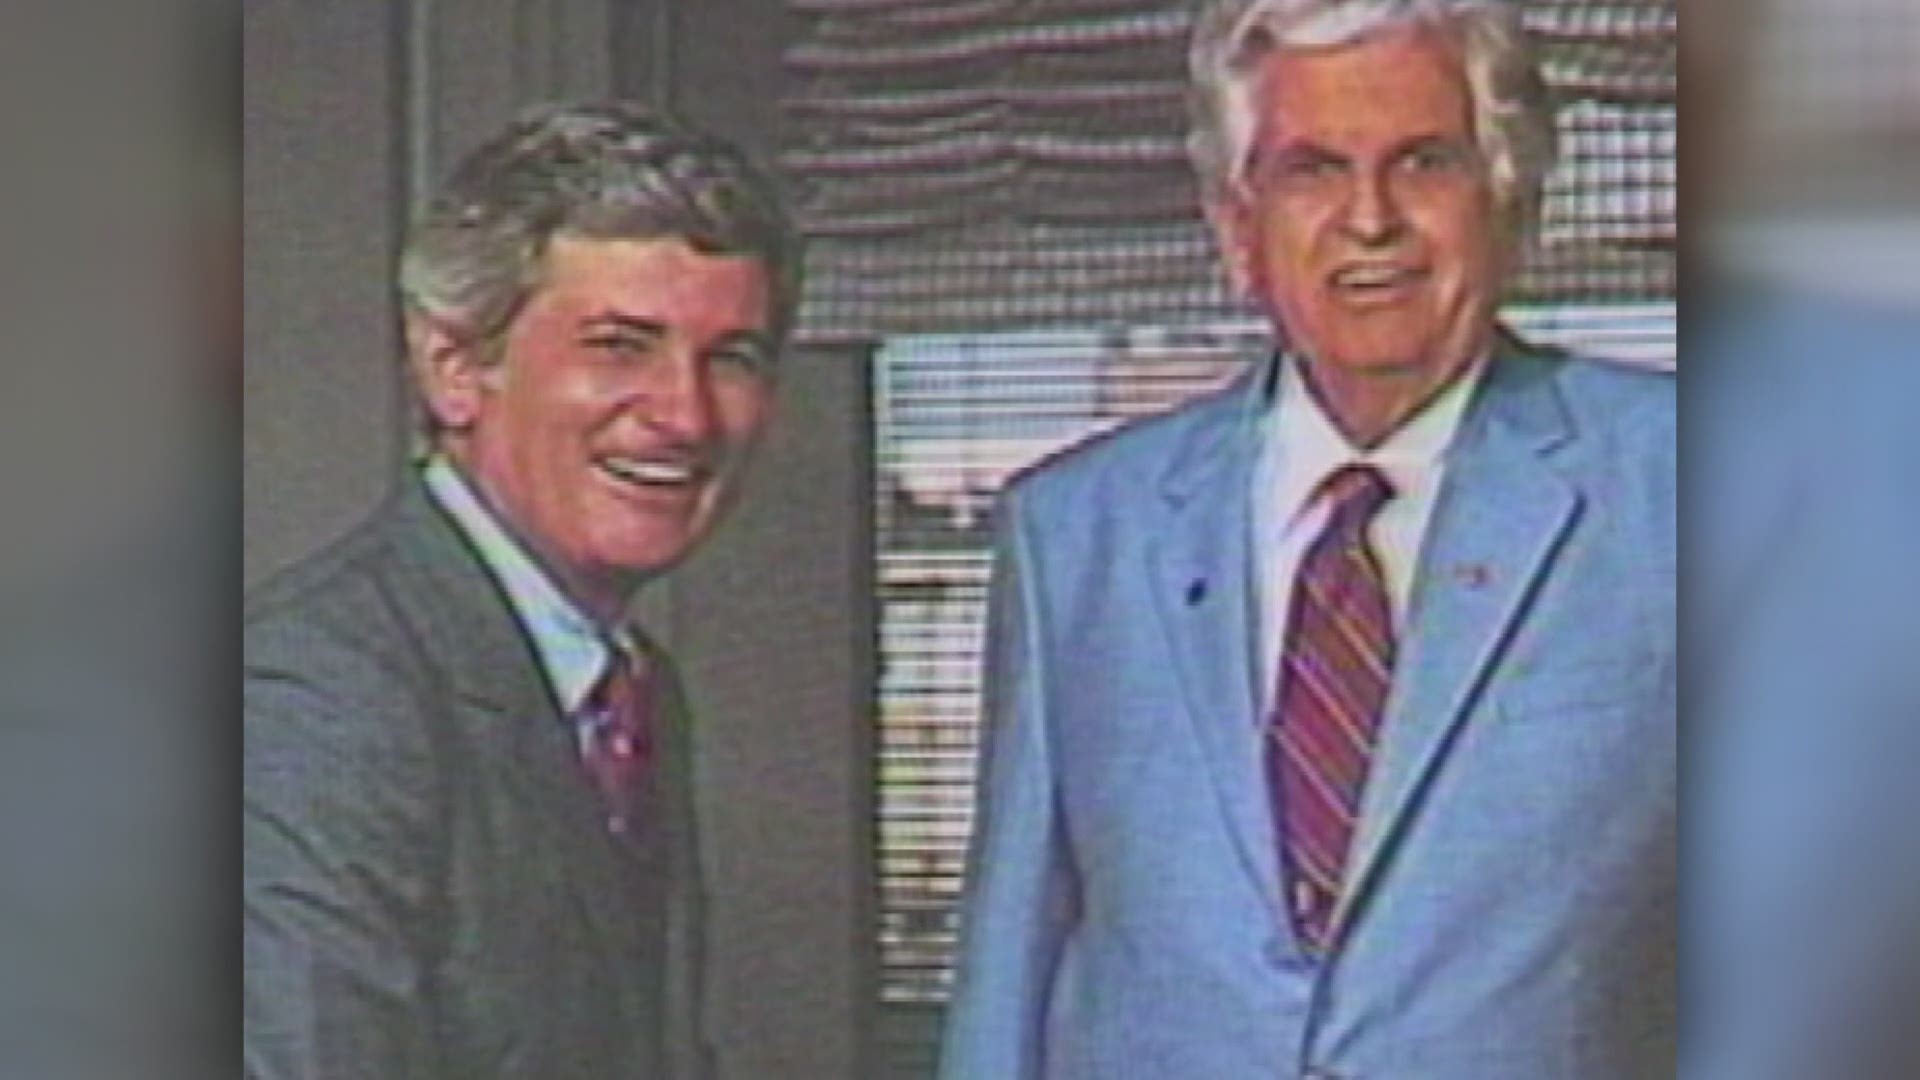 Sep. 2006: WBIR's Bill Williams examines the historic financial success and failure of brothers Jake and CH Butcher, Jr.  This two-part segment for the "Our Stories" series that recapped the significant newsworthy events of WBIR-TV's first 50 years on-air